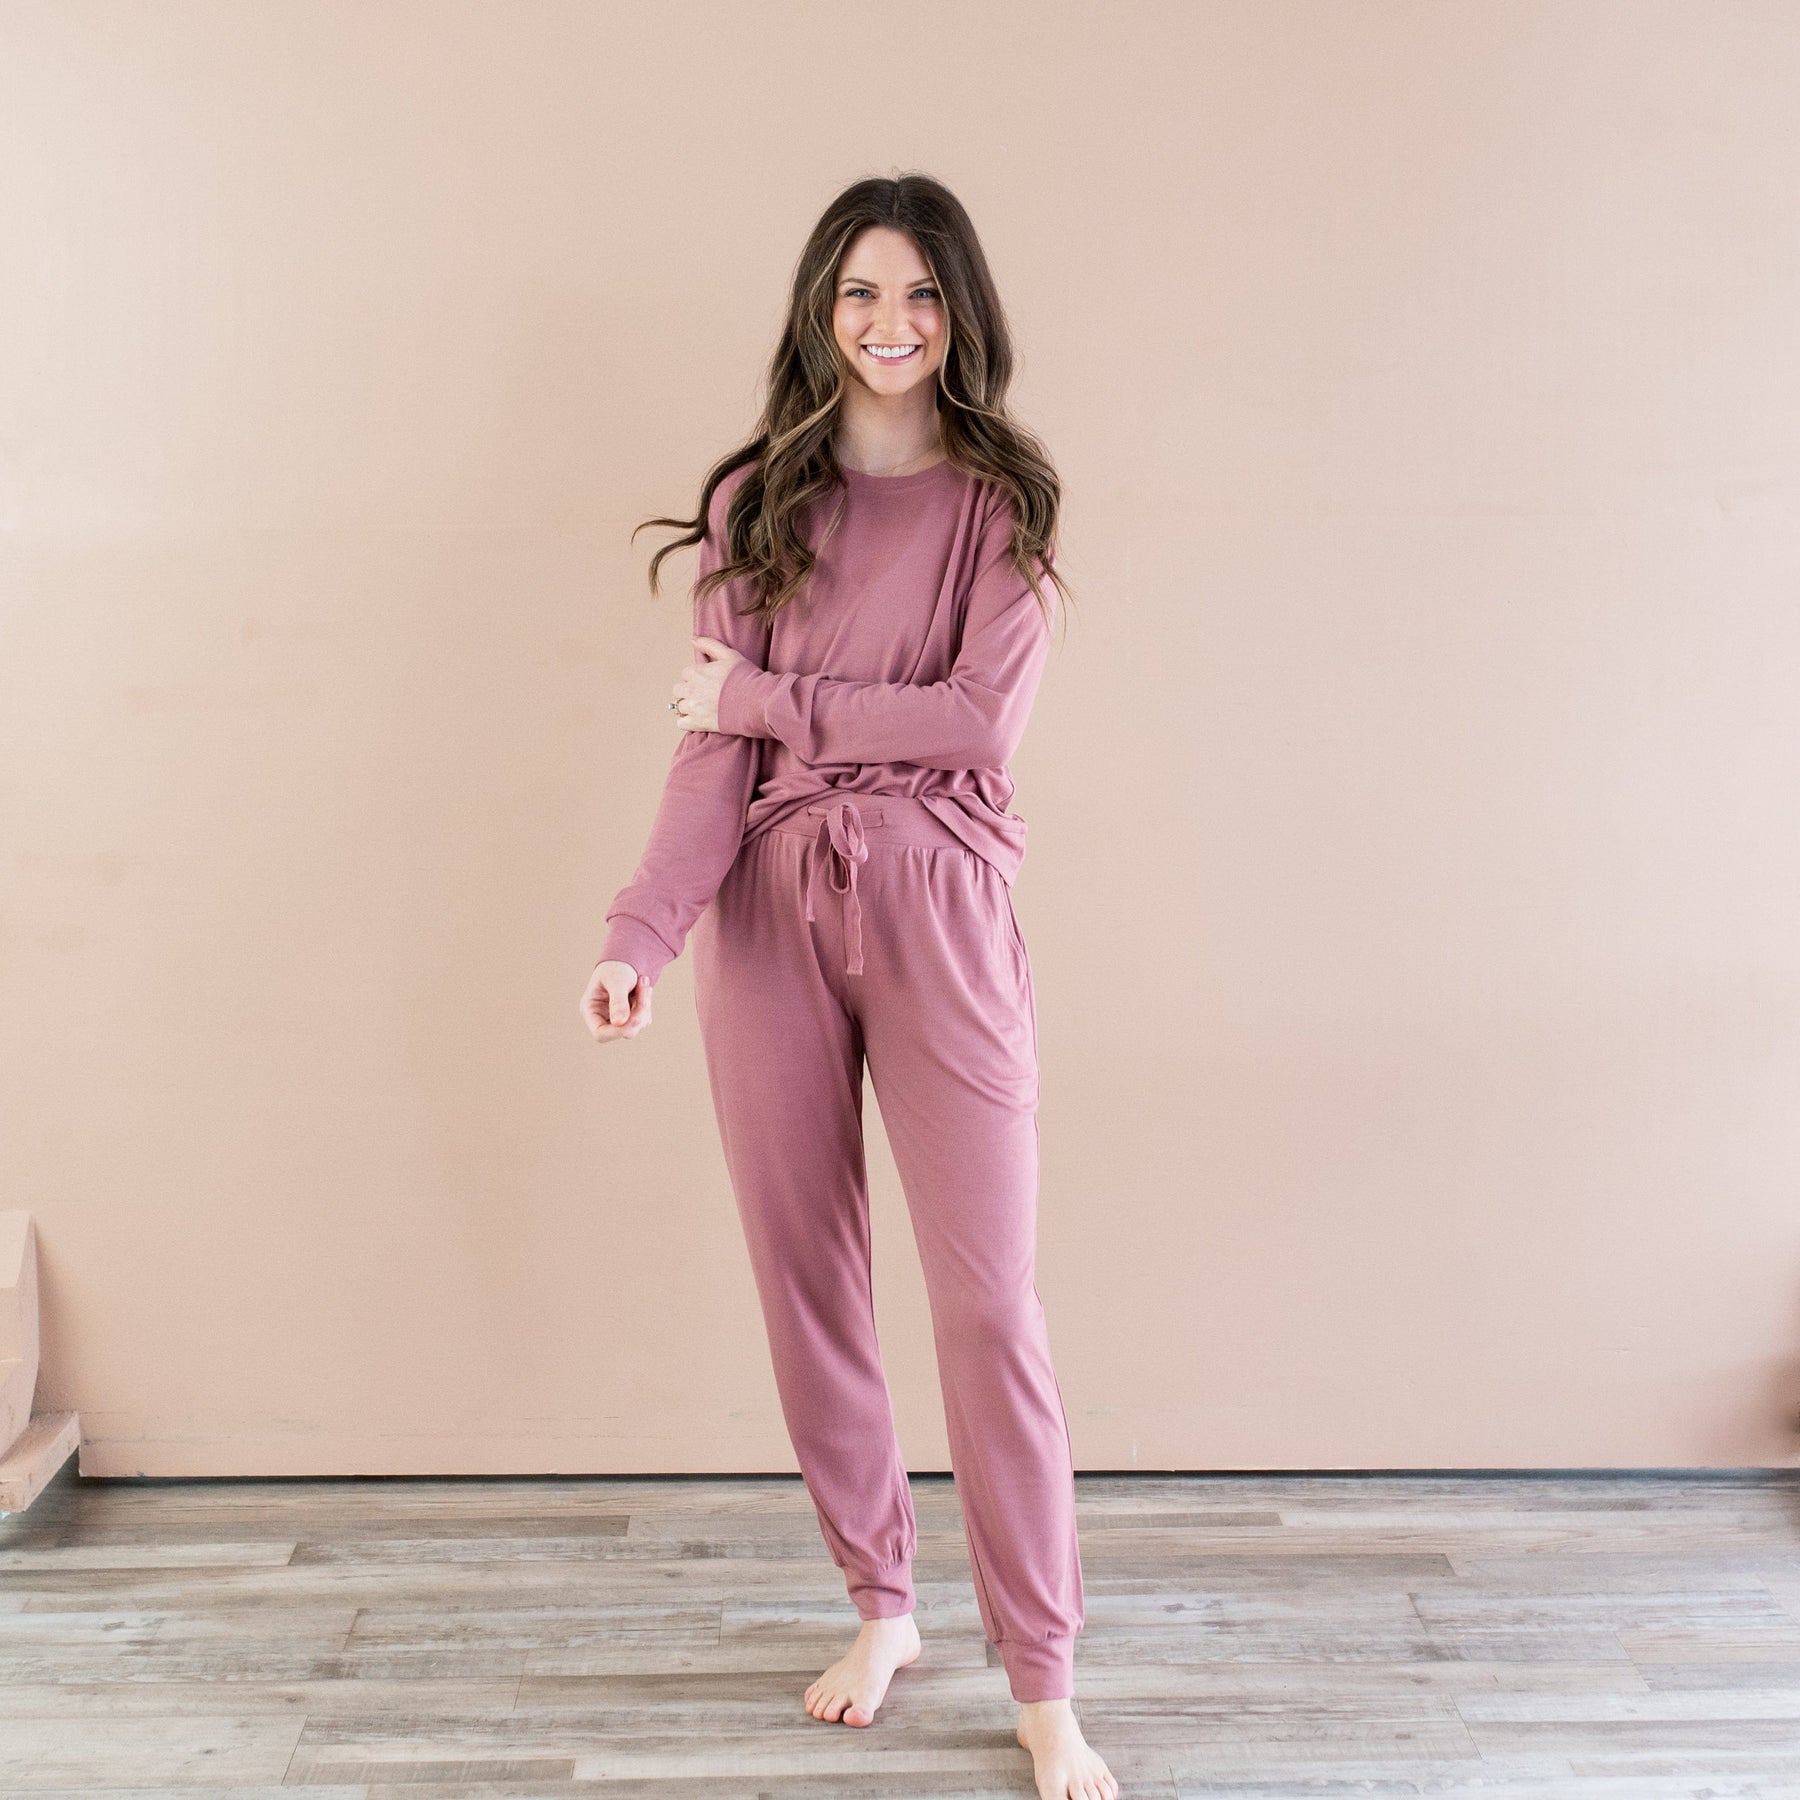 Kyte Baby Women's Bamboo Jersey Jogger Top Women's Bamboo Jersey Jogger Top in Dusty Rose